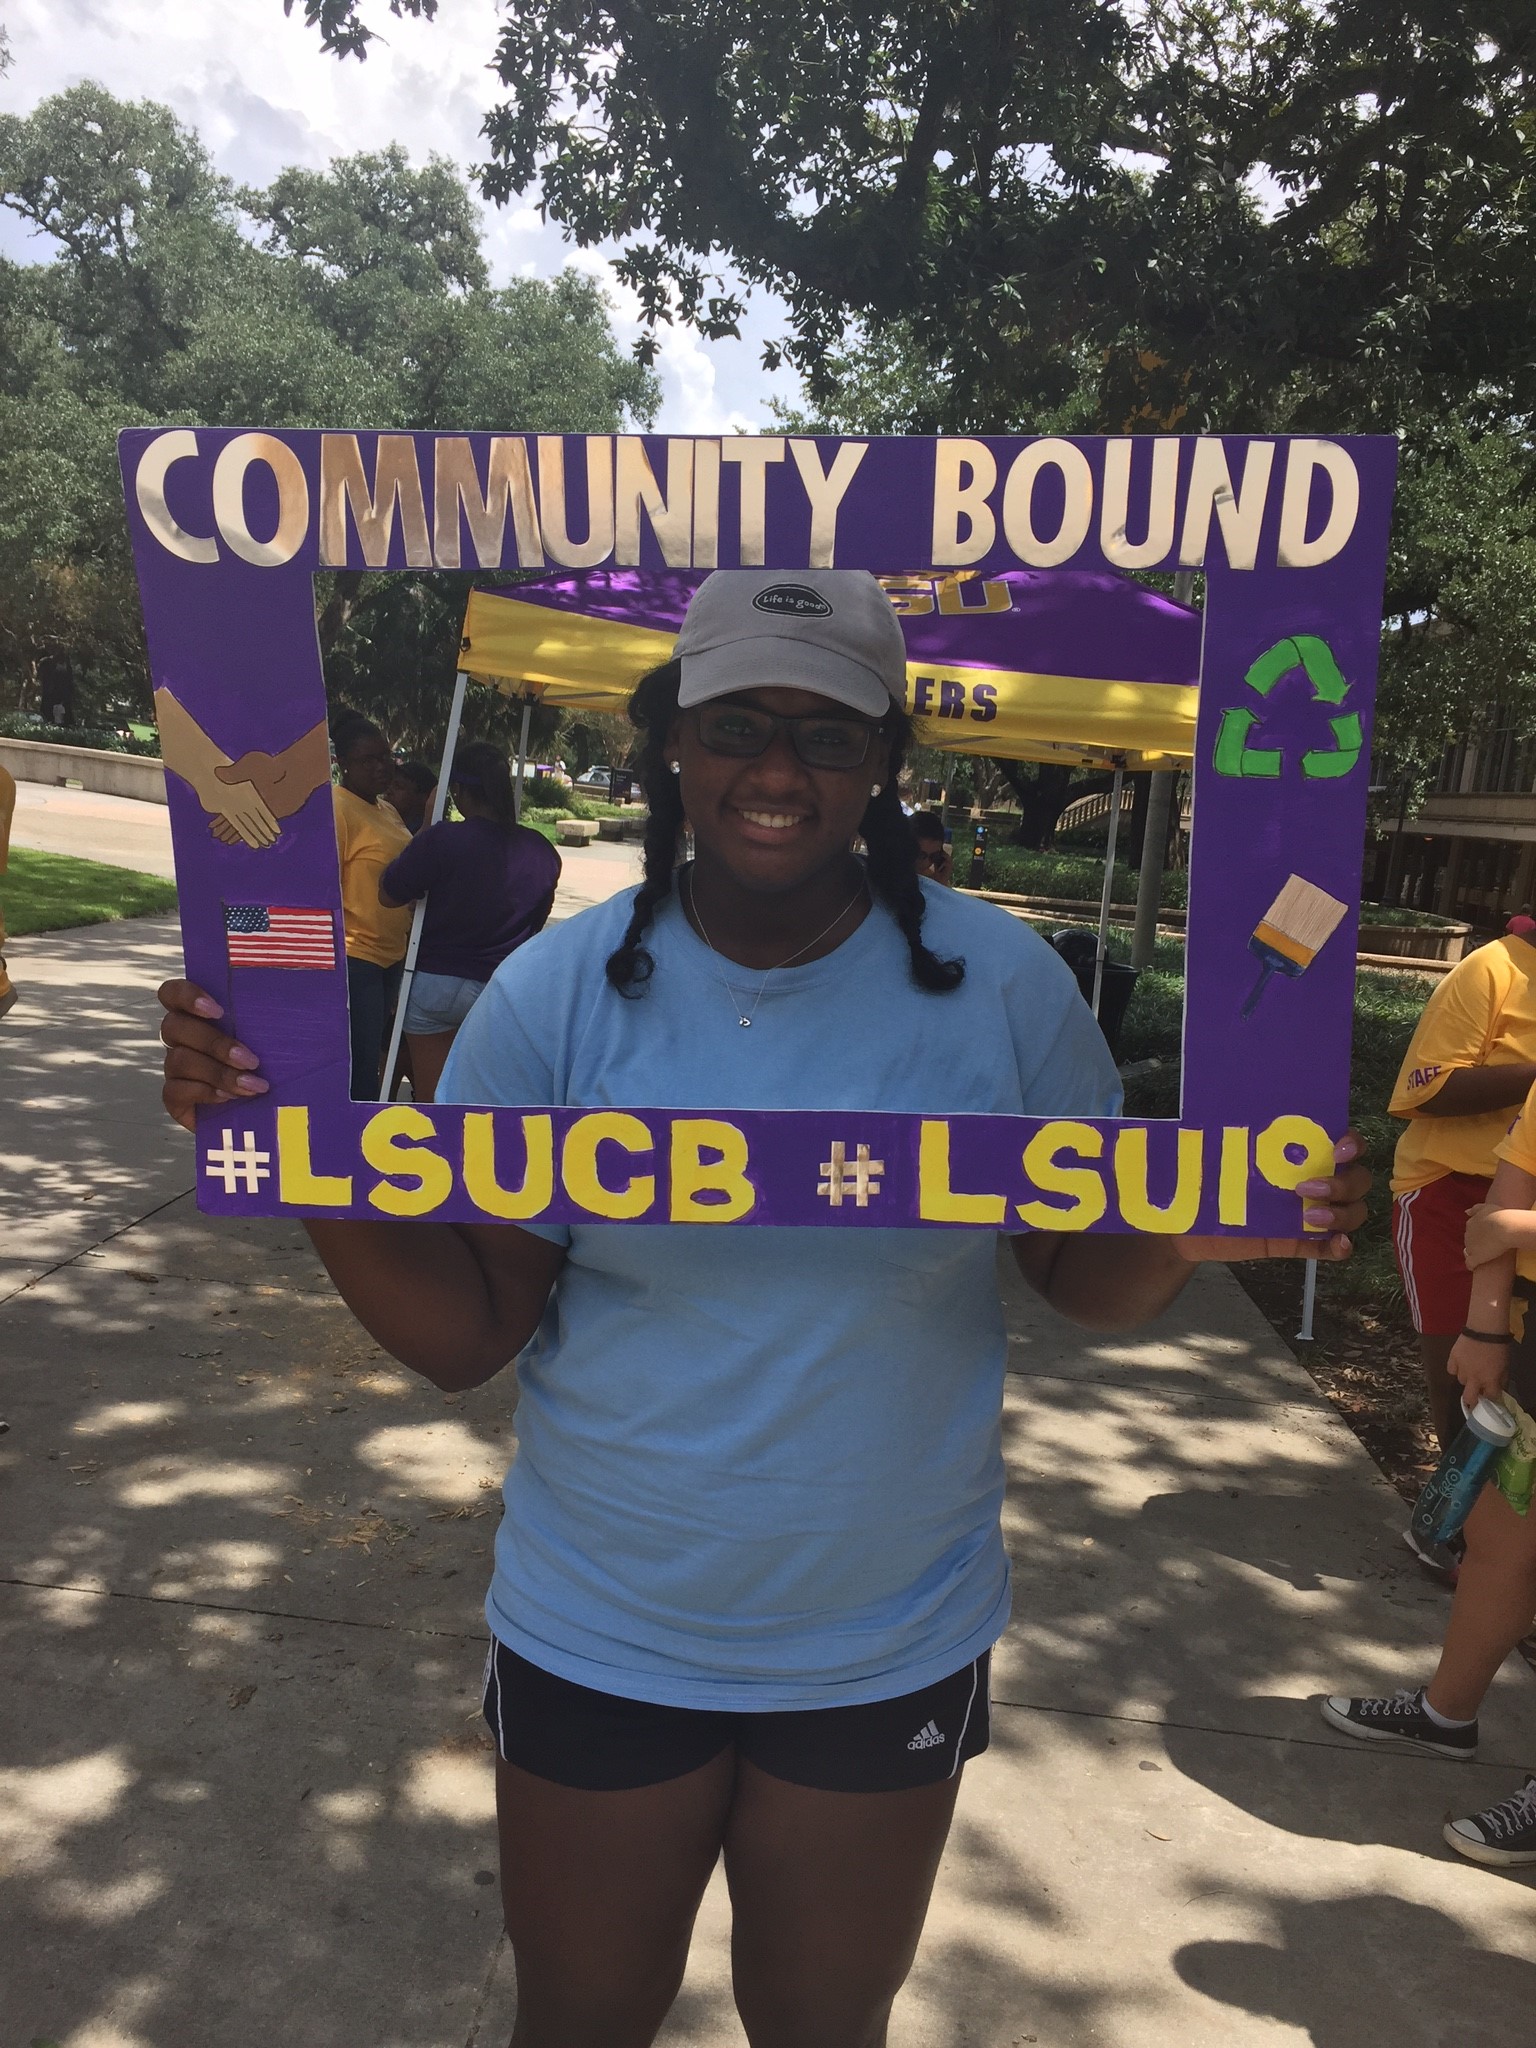 Layah attends LSU community engagement event, poses with purple border.